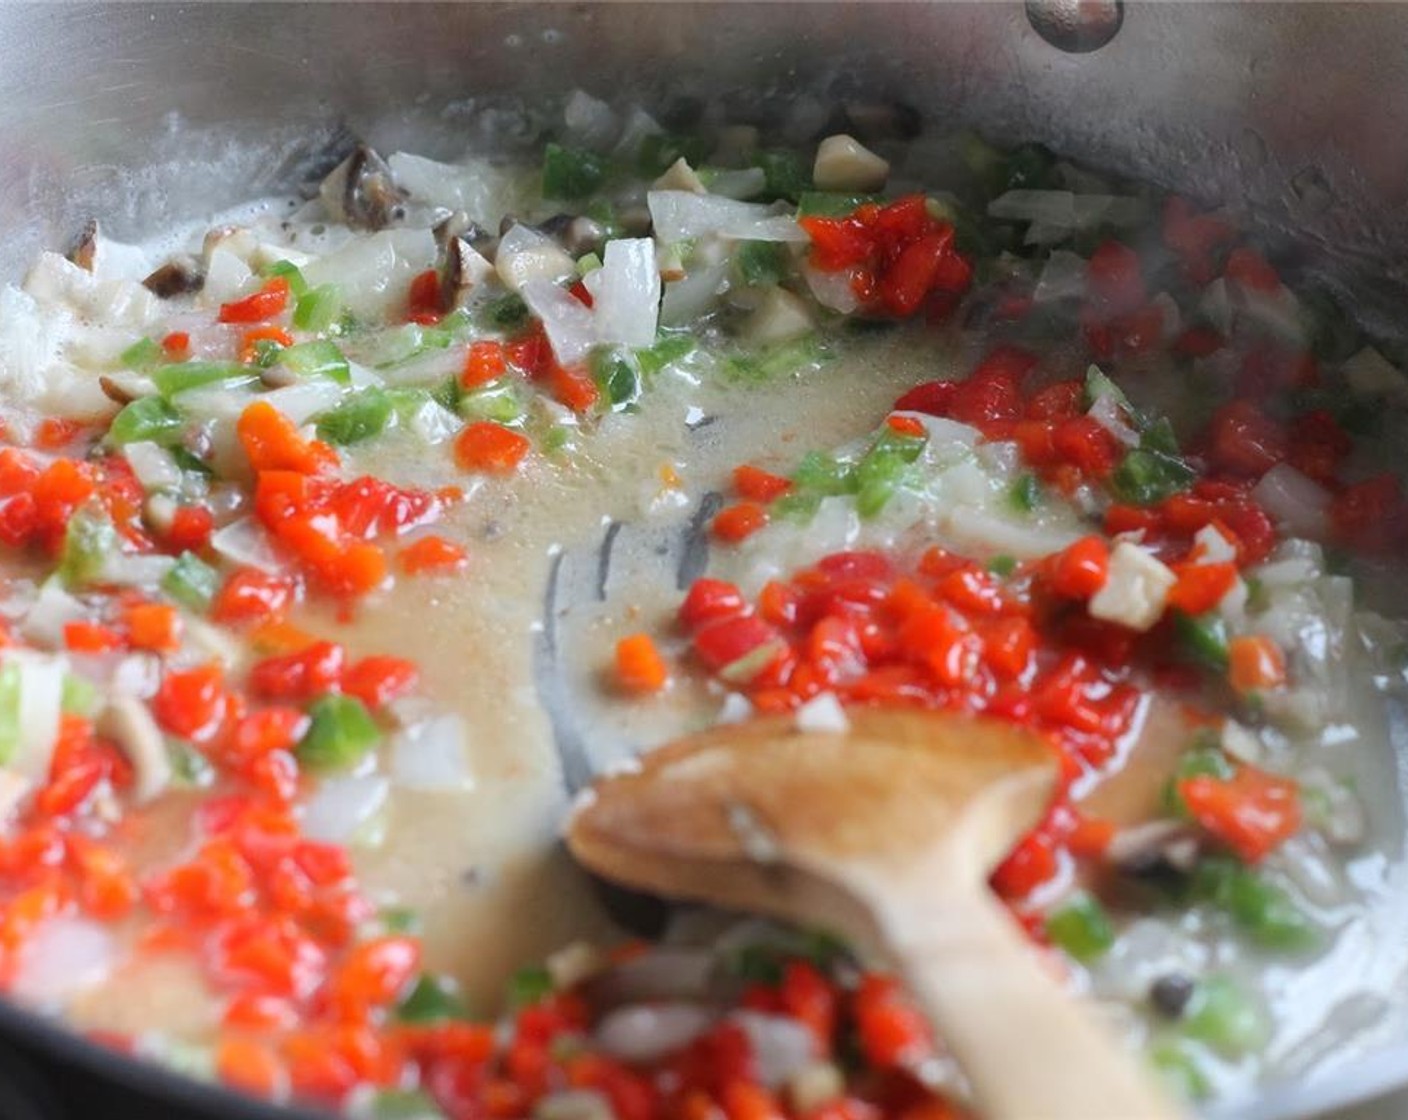 step 8 In an extra-large skillet or stockpot, melt Butter (1/2 cup) and add Onion (1 cup), Mushroom (1 cup), Green Bell Pepper (1/2 cup), and Pimiento Pepper (1 jar). Stir and sauté until all vegetables are tender.